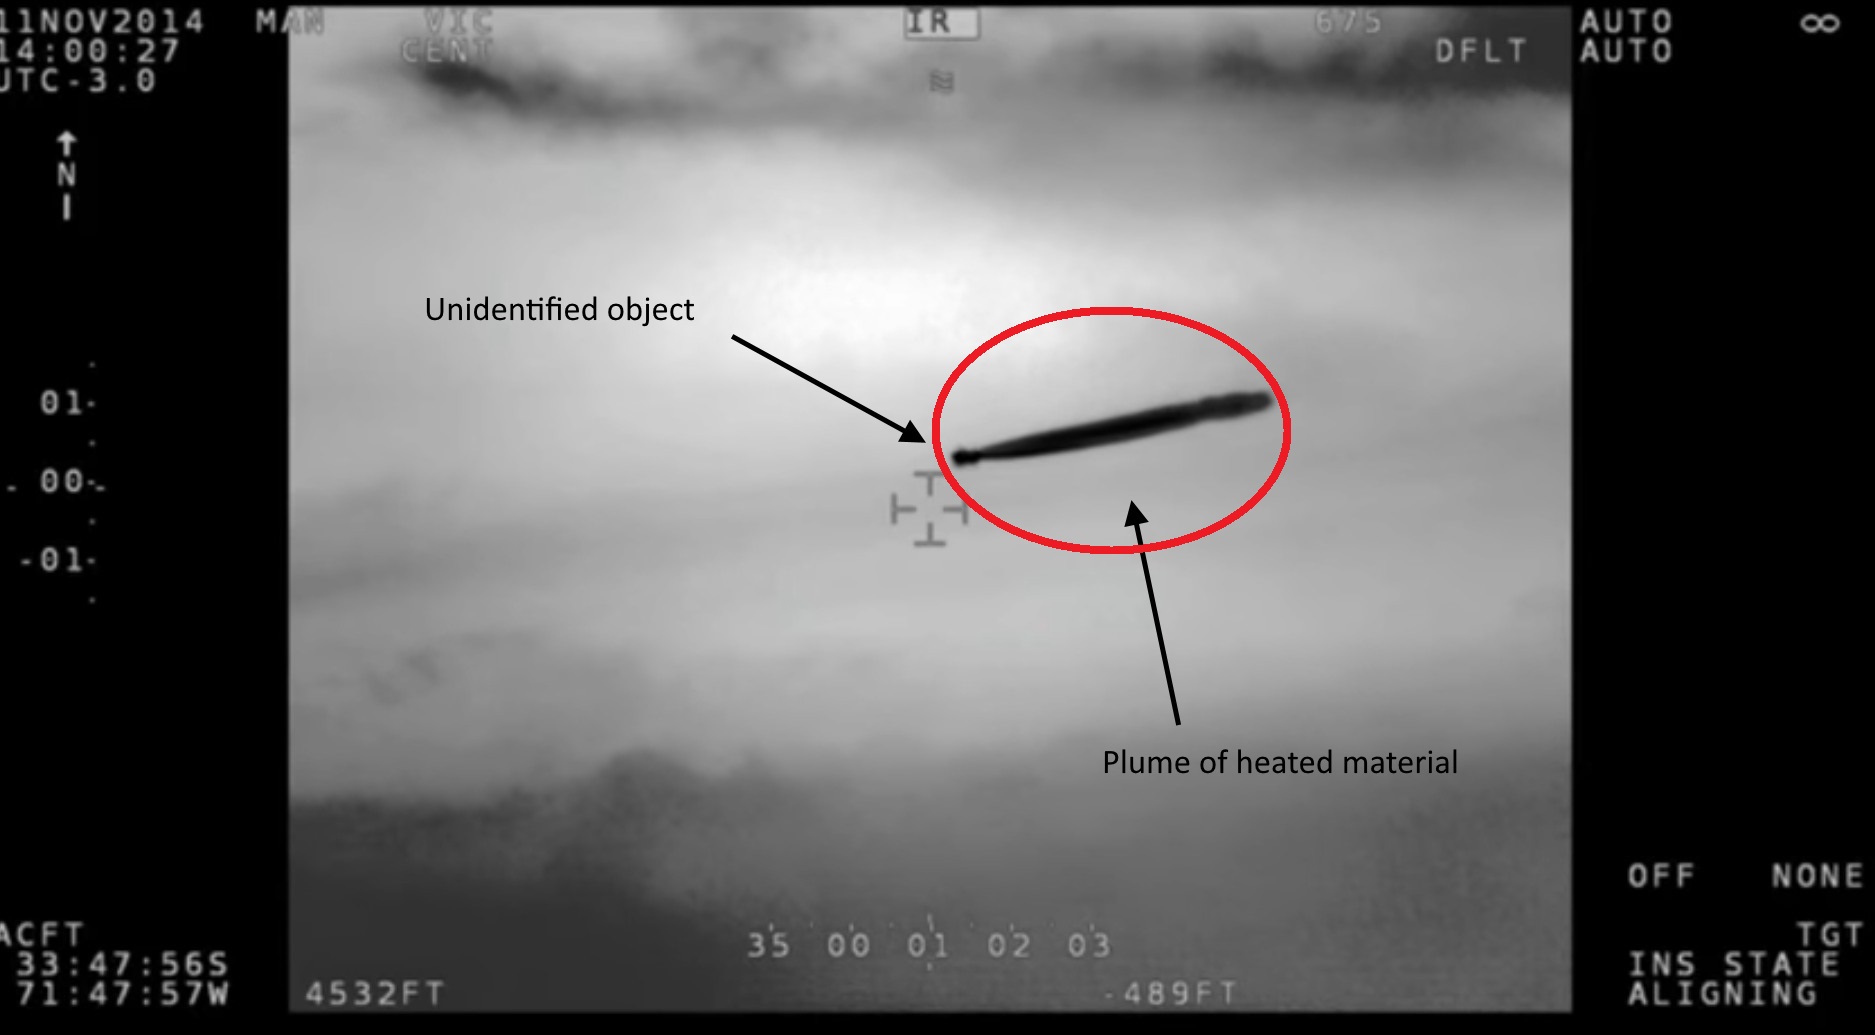 The-Chilean-Government-Just-Released-RARE-Footage-Of-UFO-Hovering-The-Skies.jpg